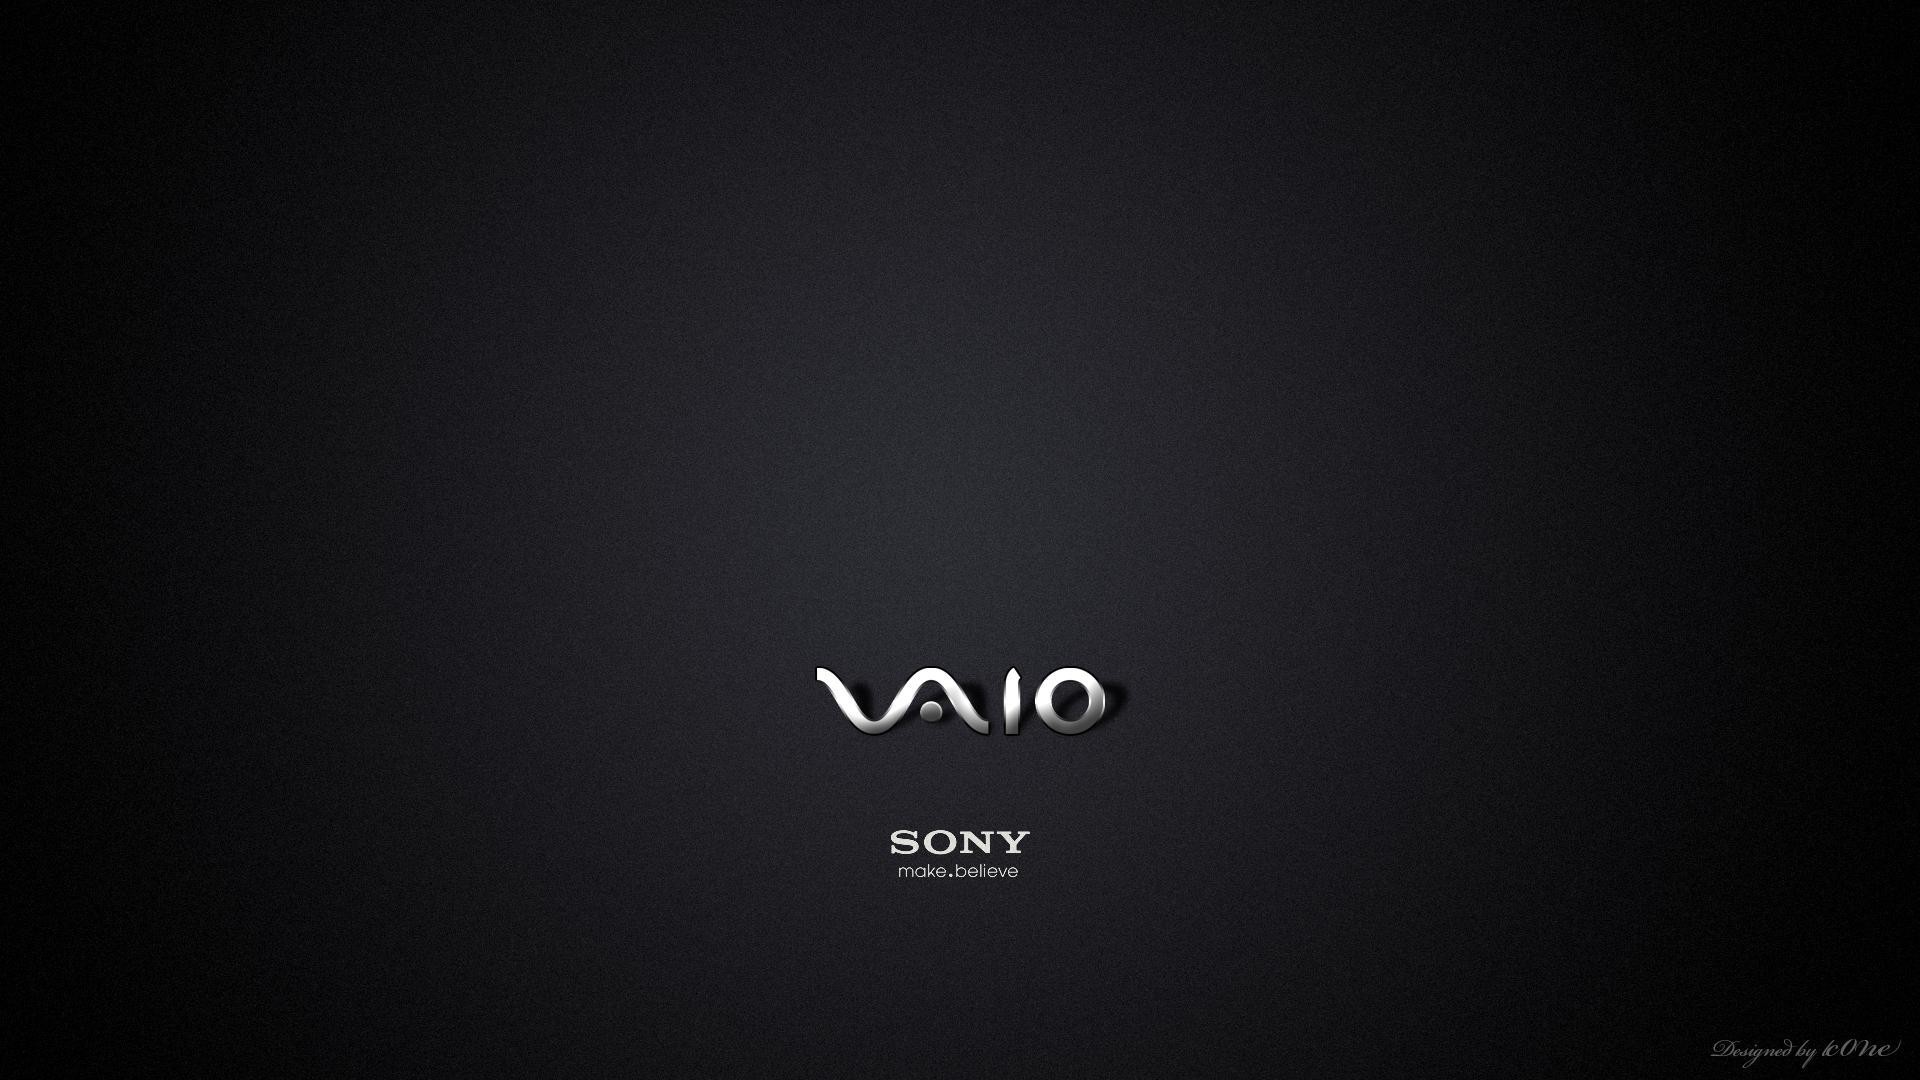 Vaio Wallpapers 1366x768 Hd 59 Images